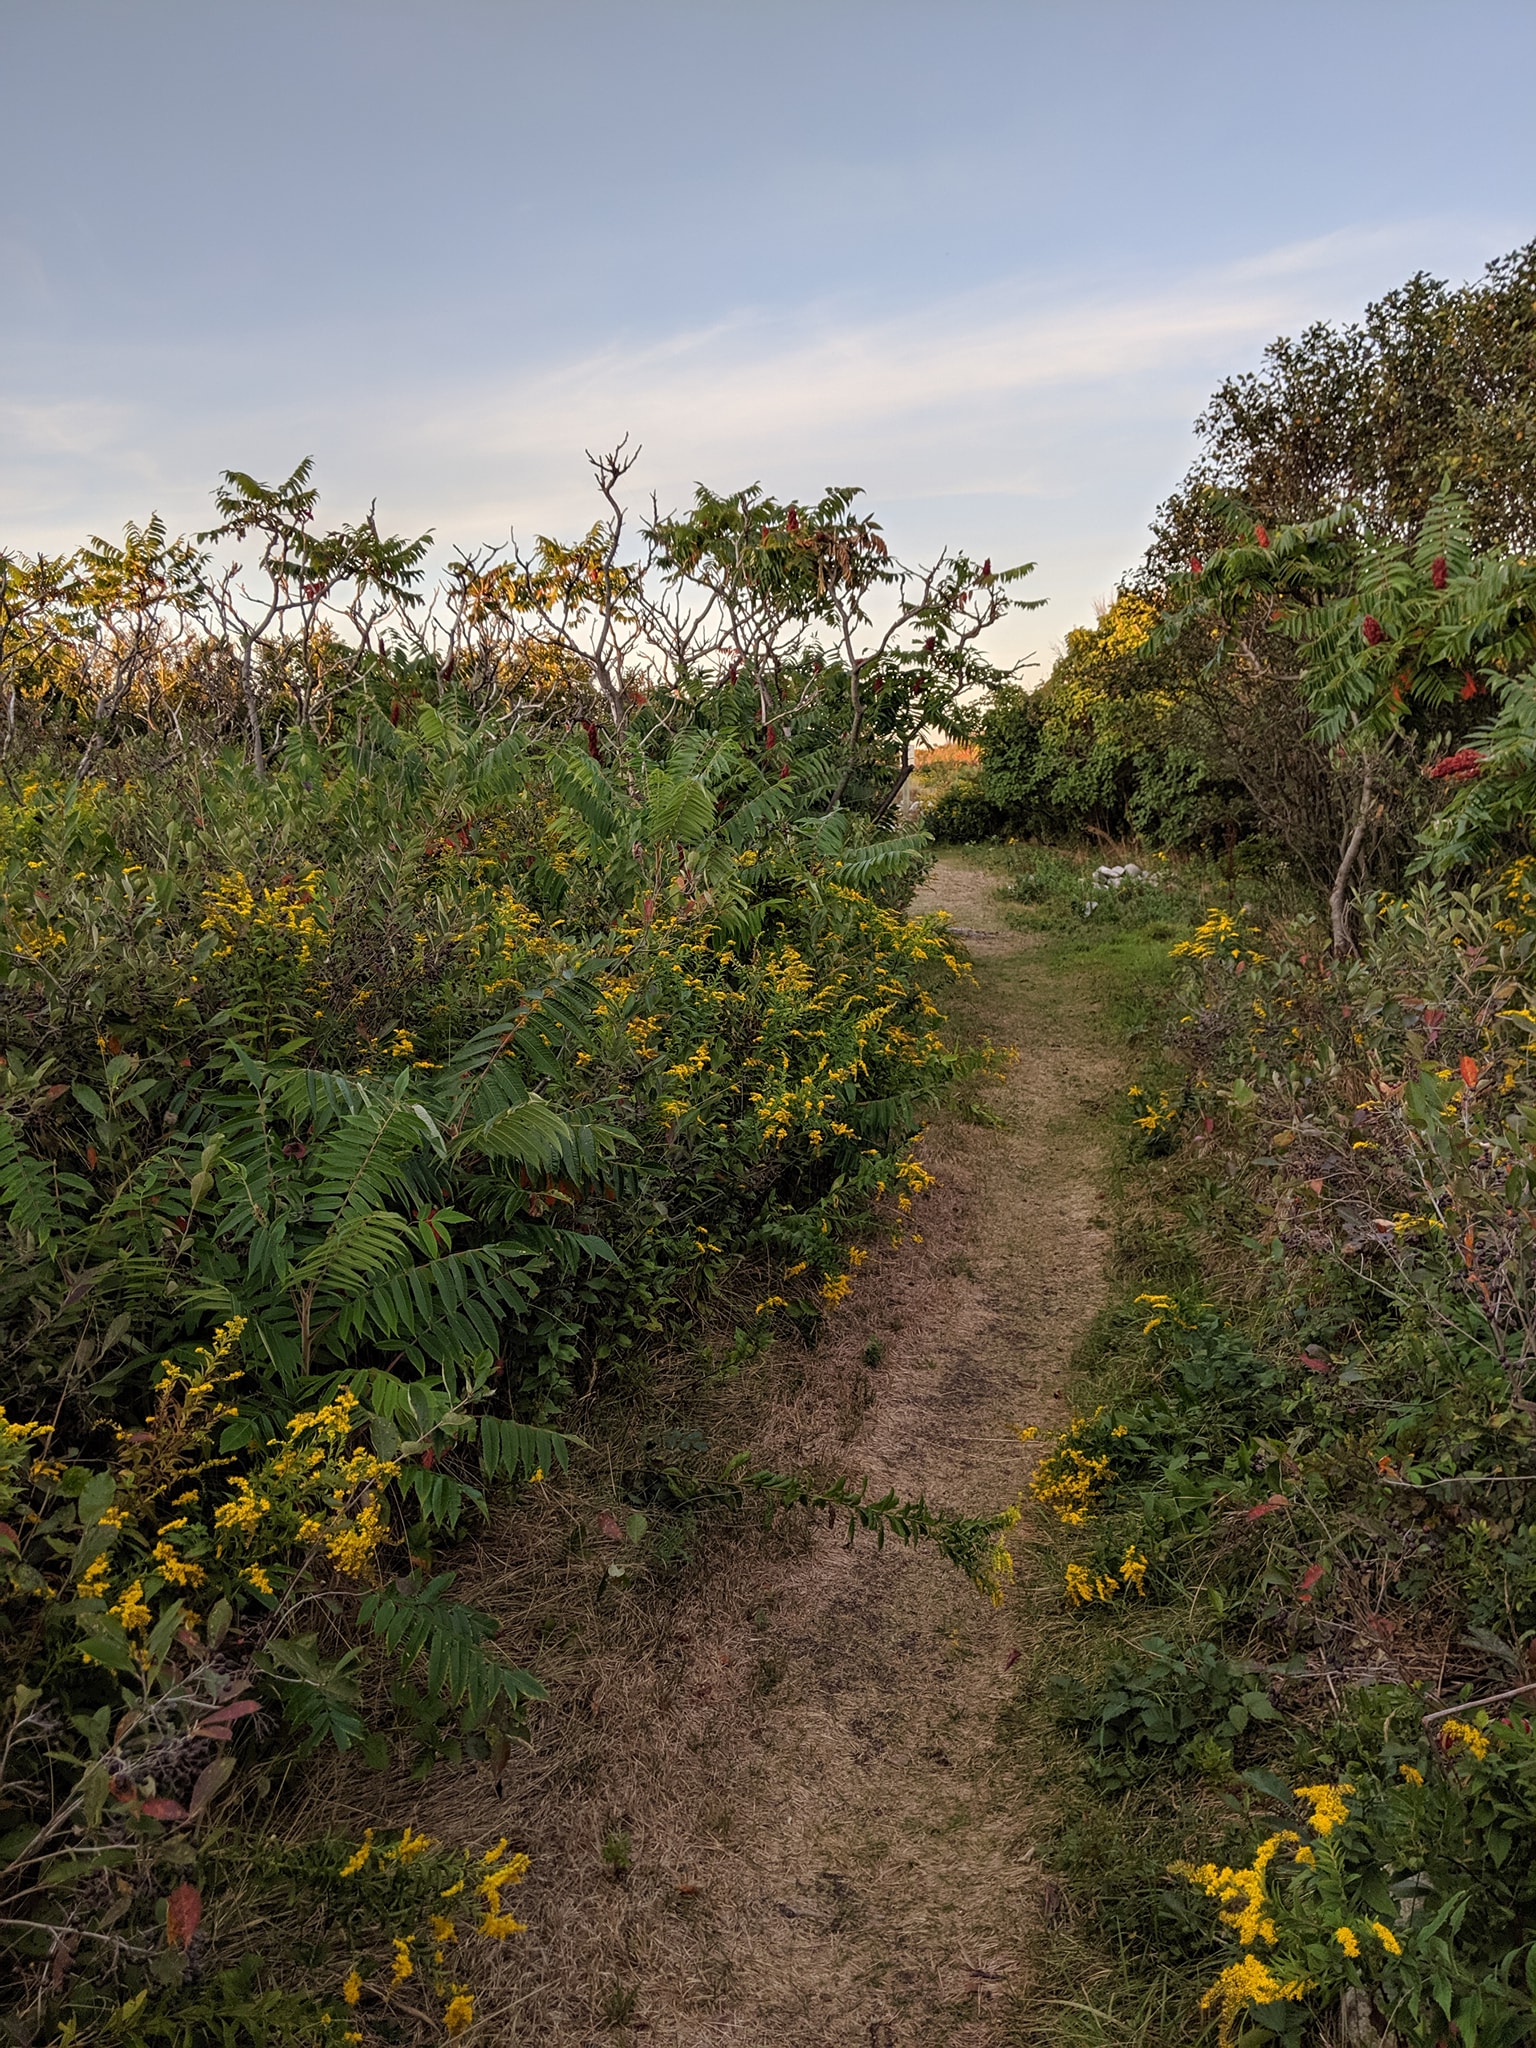 A trail through some flowers and bushes